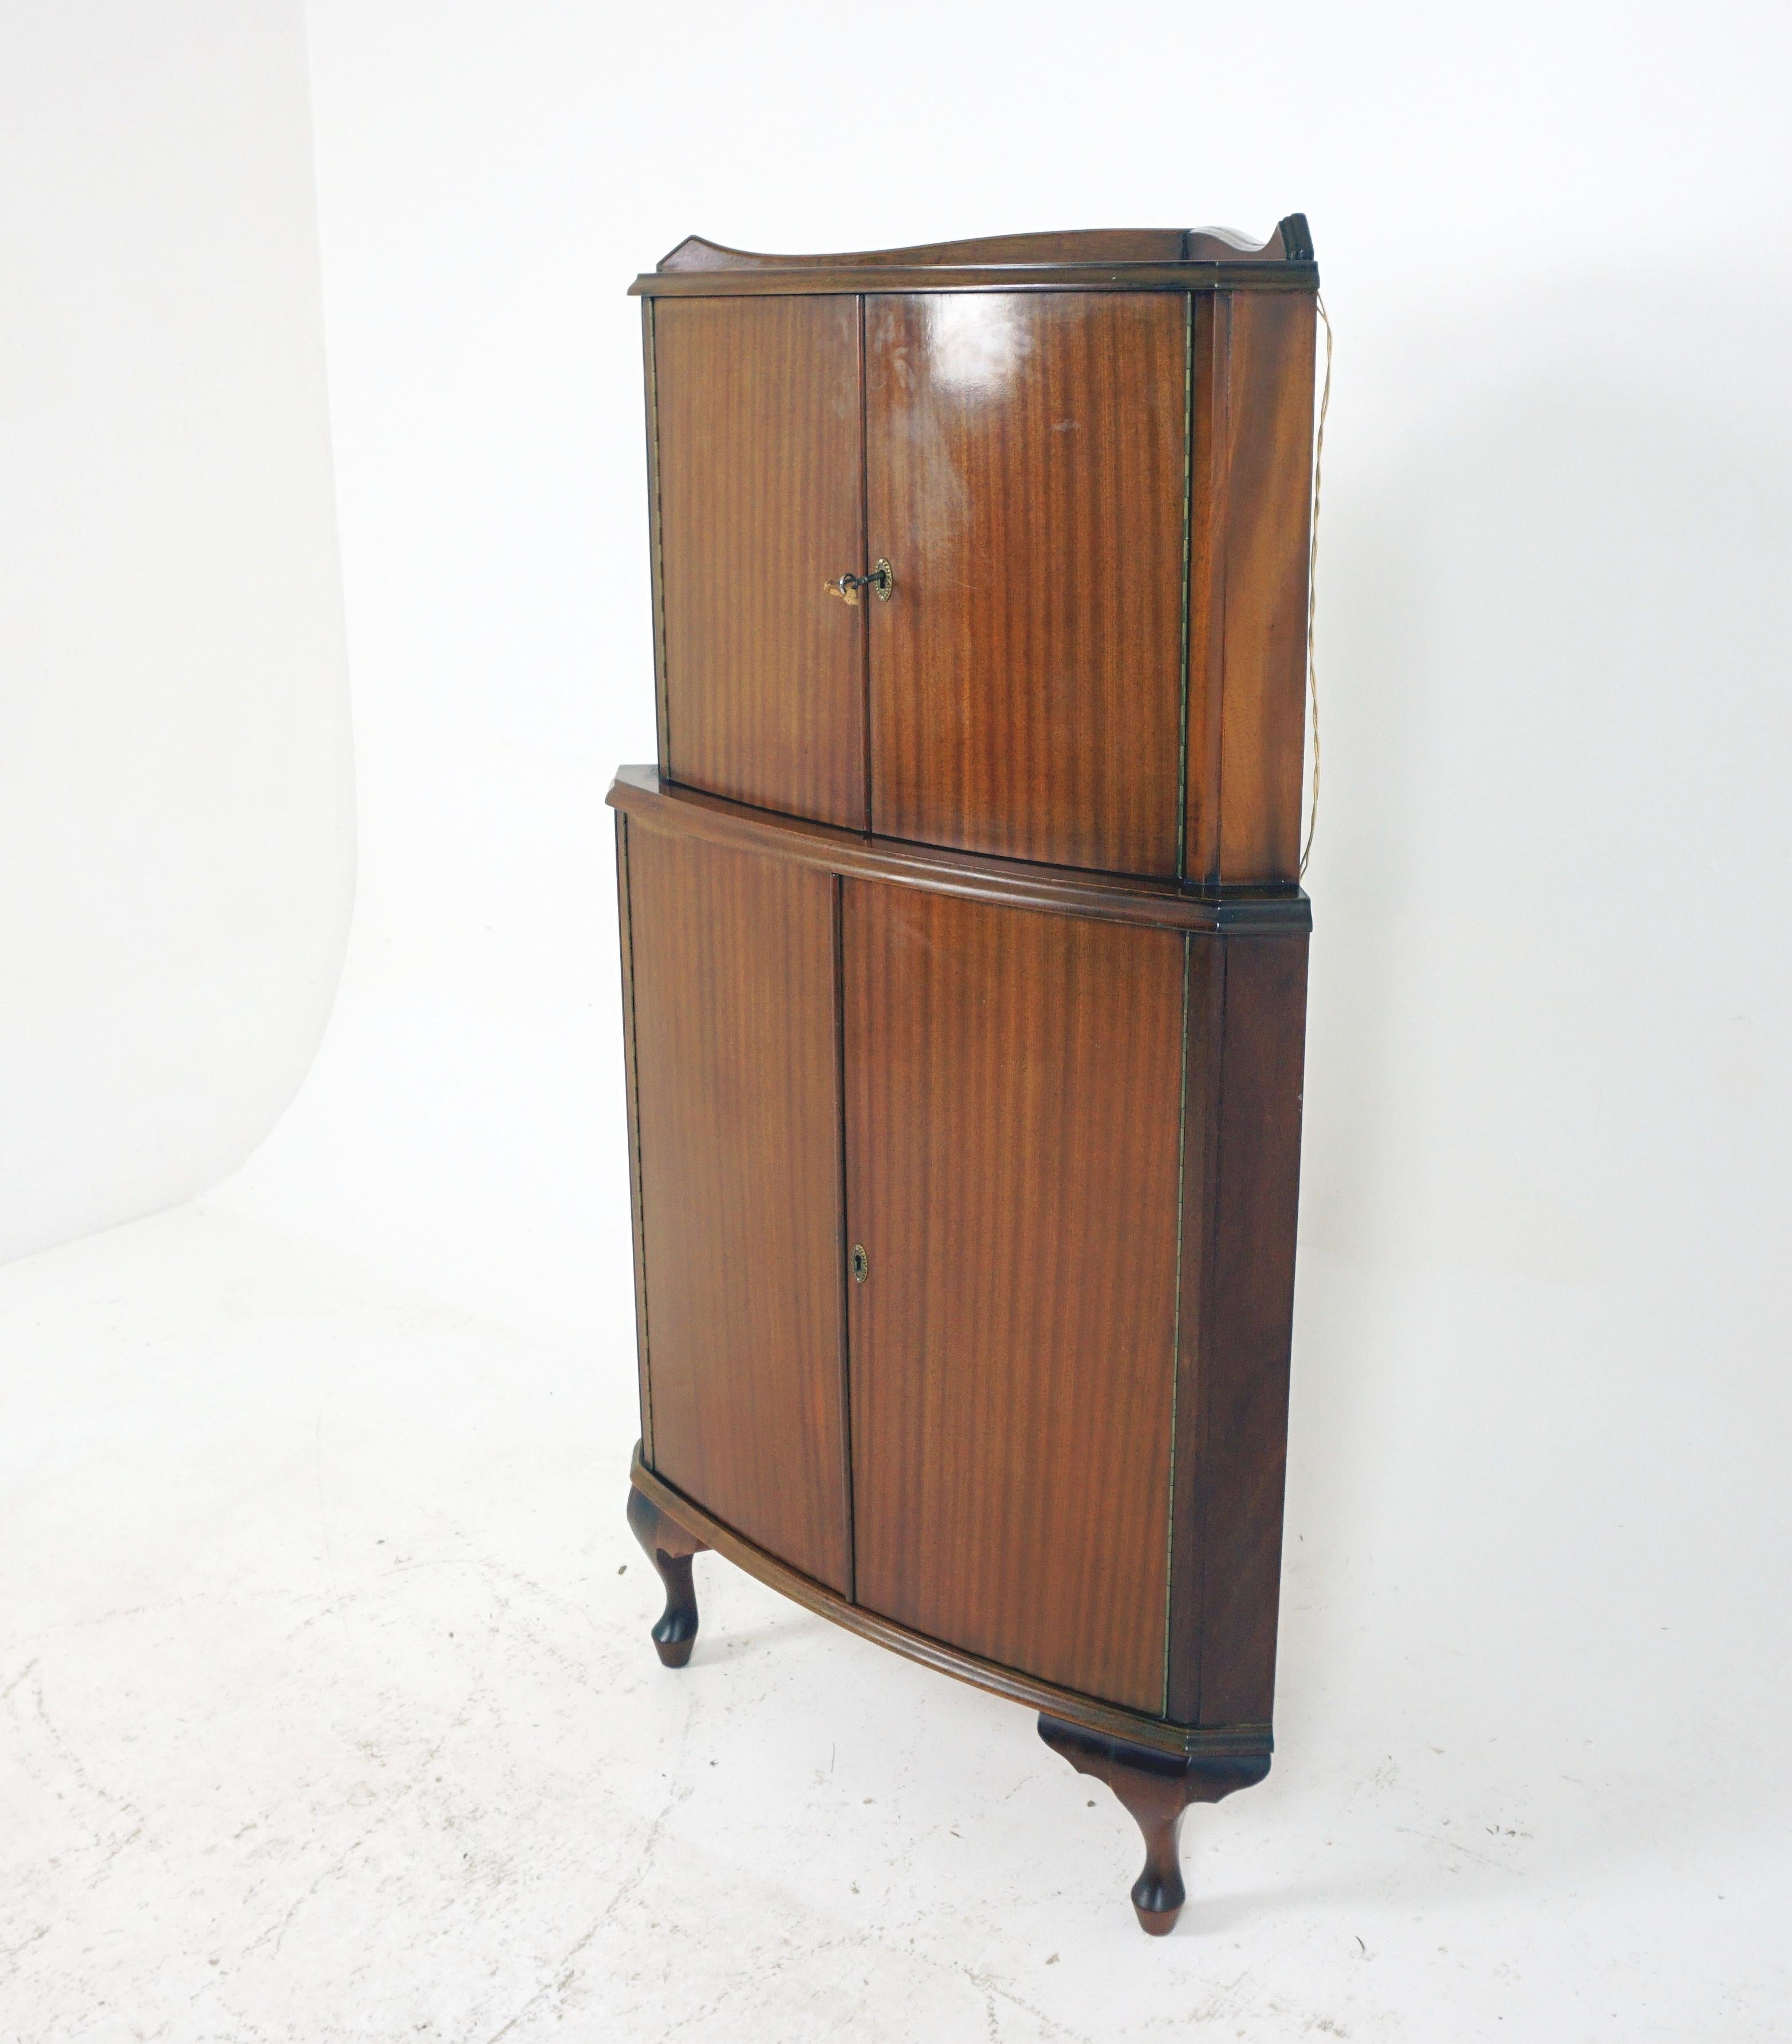 Vintage Art Deco walnut bow front corner cocktail cabinet, drinks cabinet, Scotland 1930, B2577.

Scotland 1930
Walnut.
Original finish.
Shaped gallery on top.
Pair of bow front doors.
The top part is all mirrors with glass shelf.
Lower